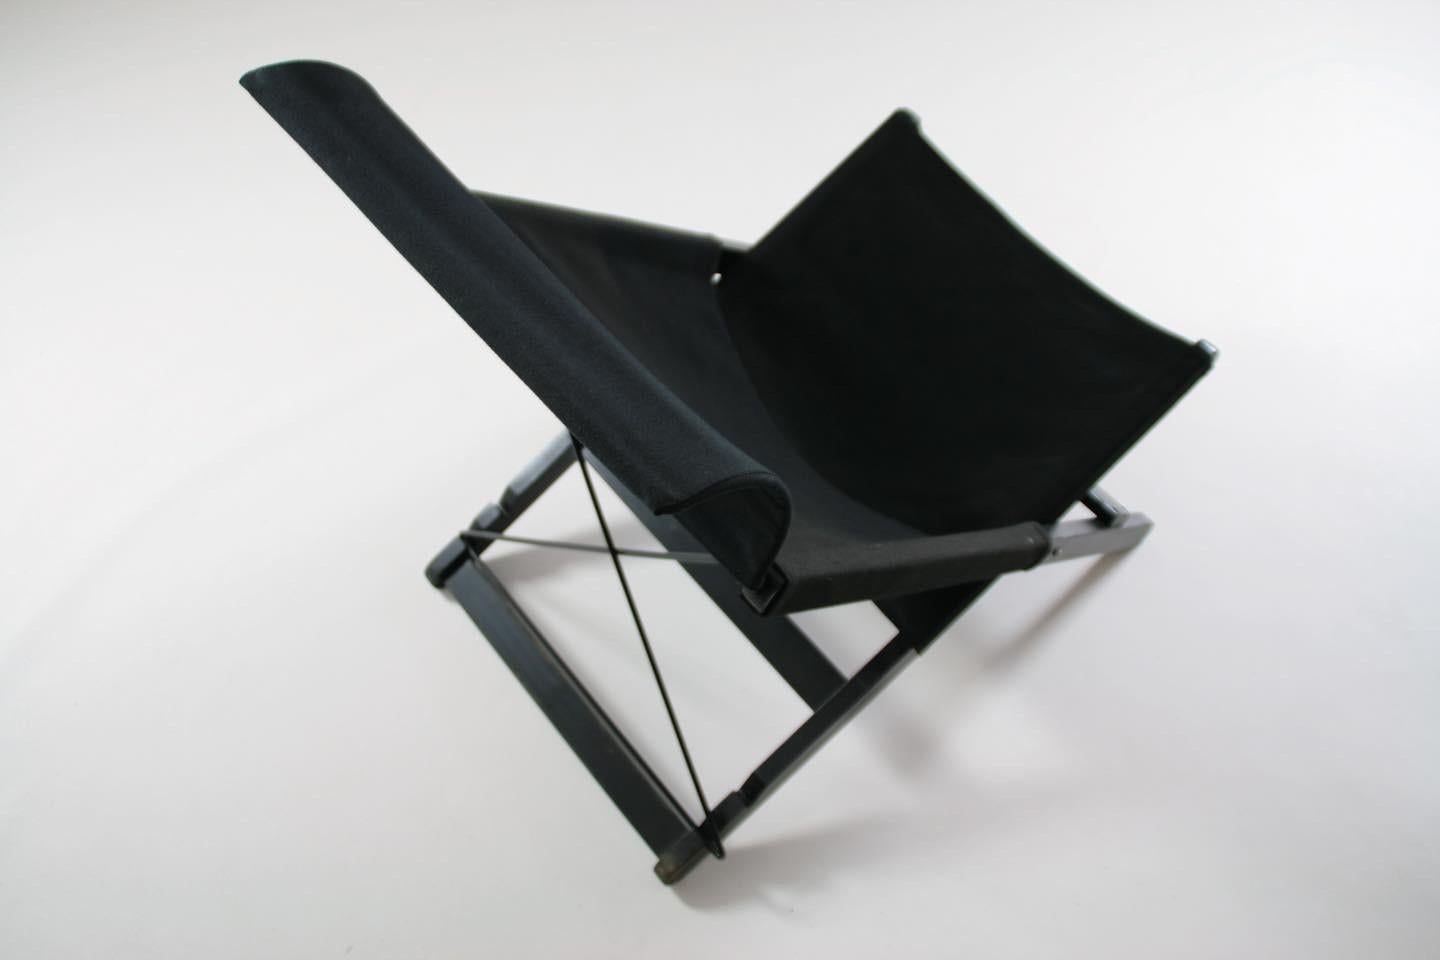 Wood and canvas folding lounge chair by Tord Bjorklund for Ikea, 1990s. Some traces of normal use. Good general condition.
Dimensions: L61 x D80 x H90 H seat 34 cm.